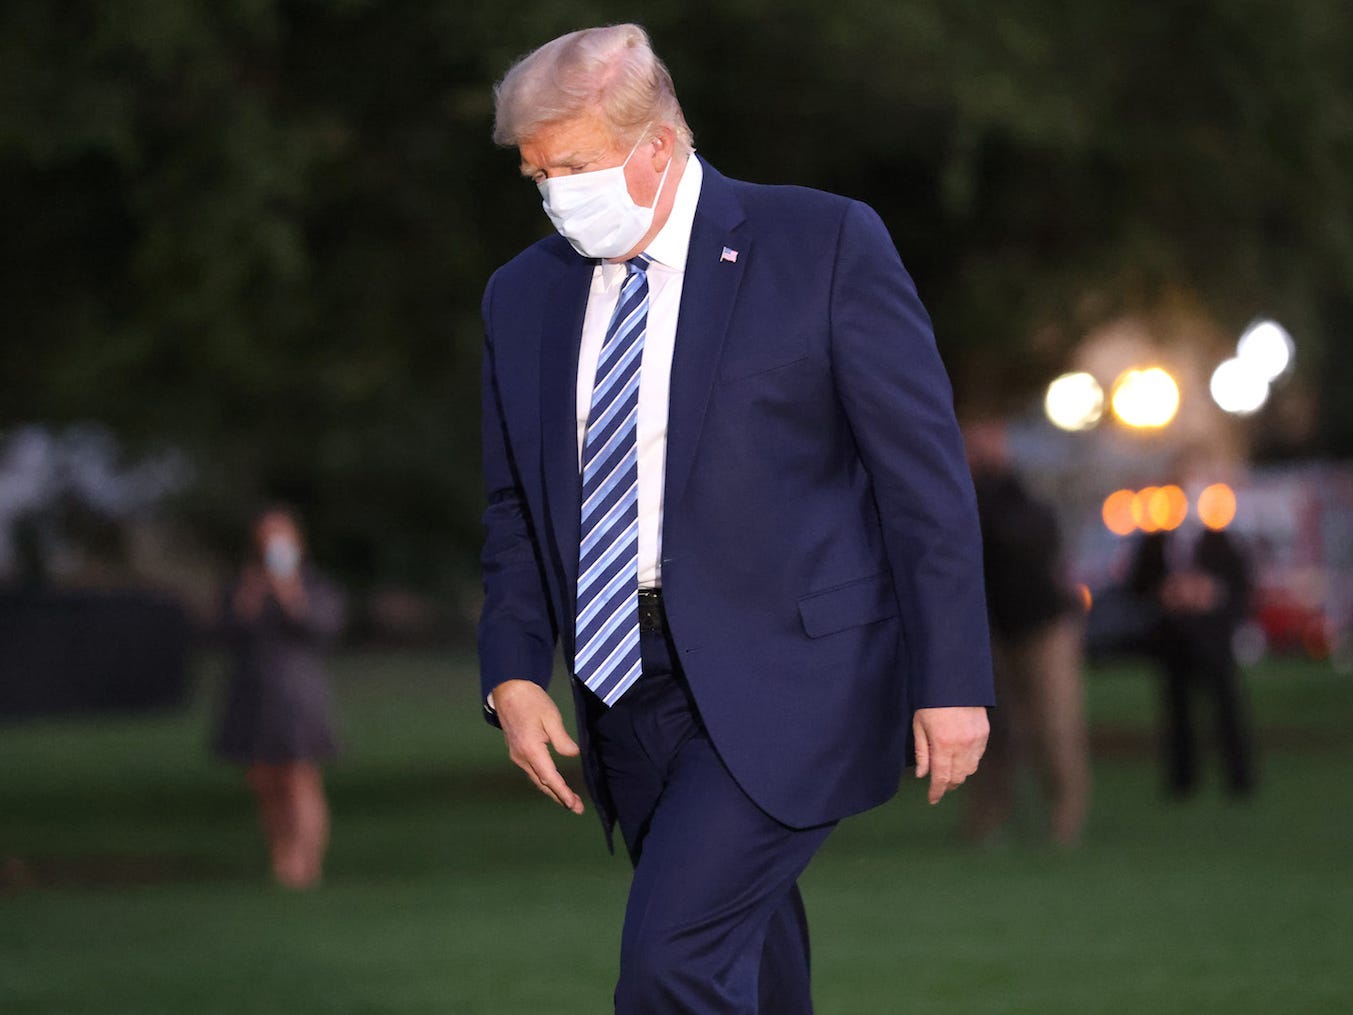 Donald Trump with face mask on